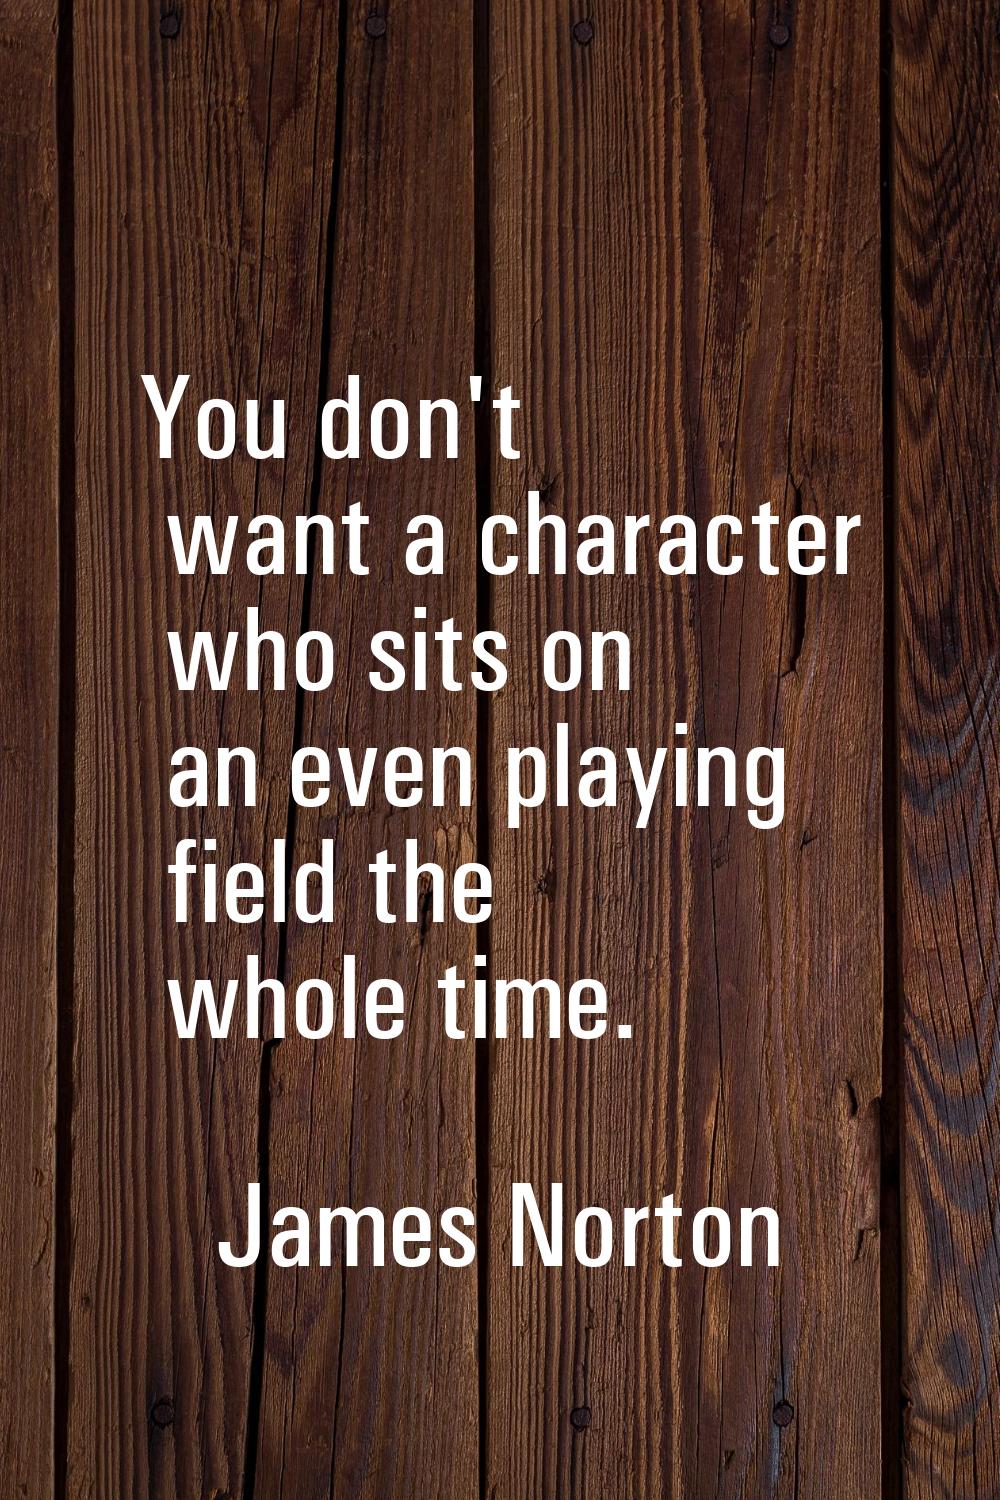 You don't want a character who sits on an even playing field the whole time.